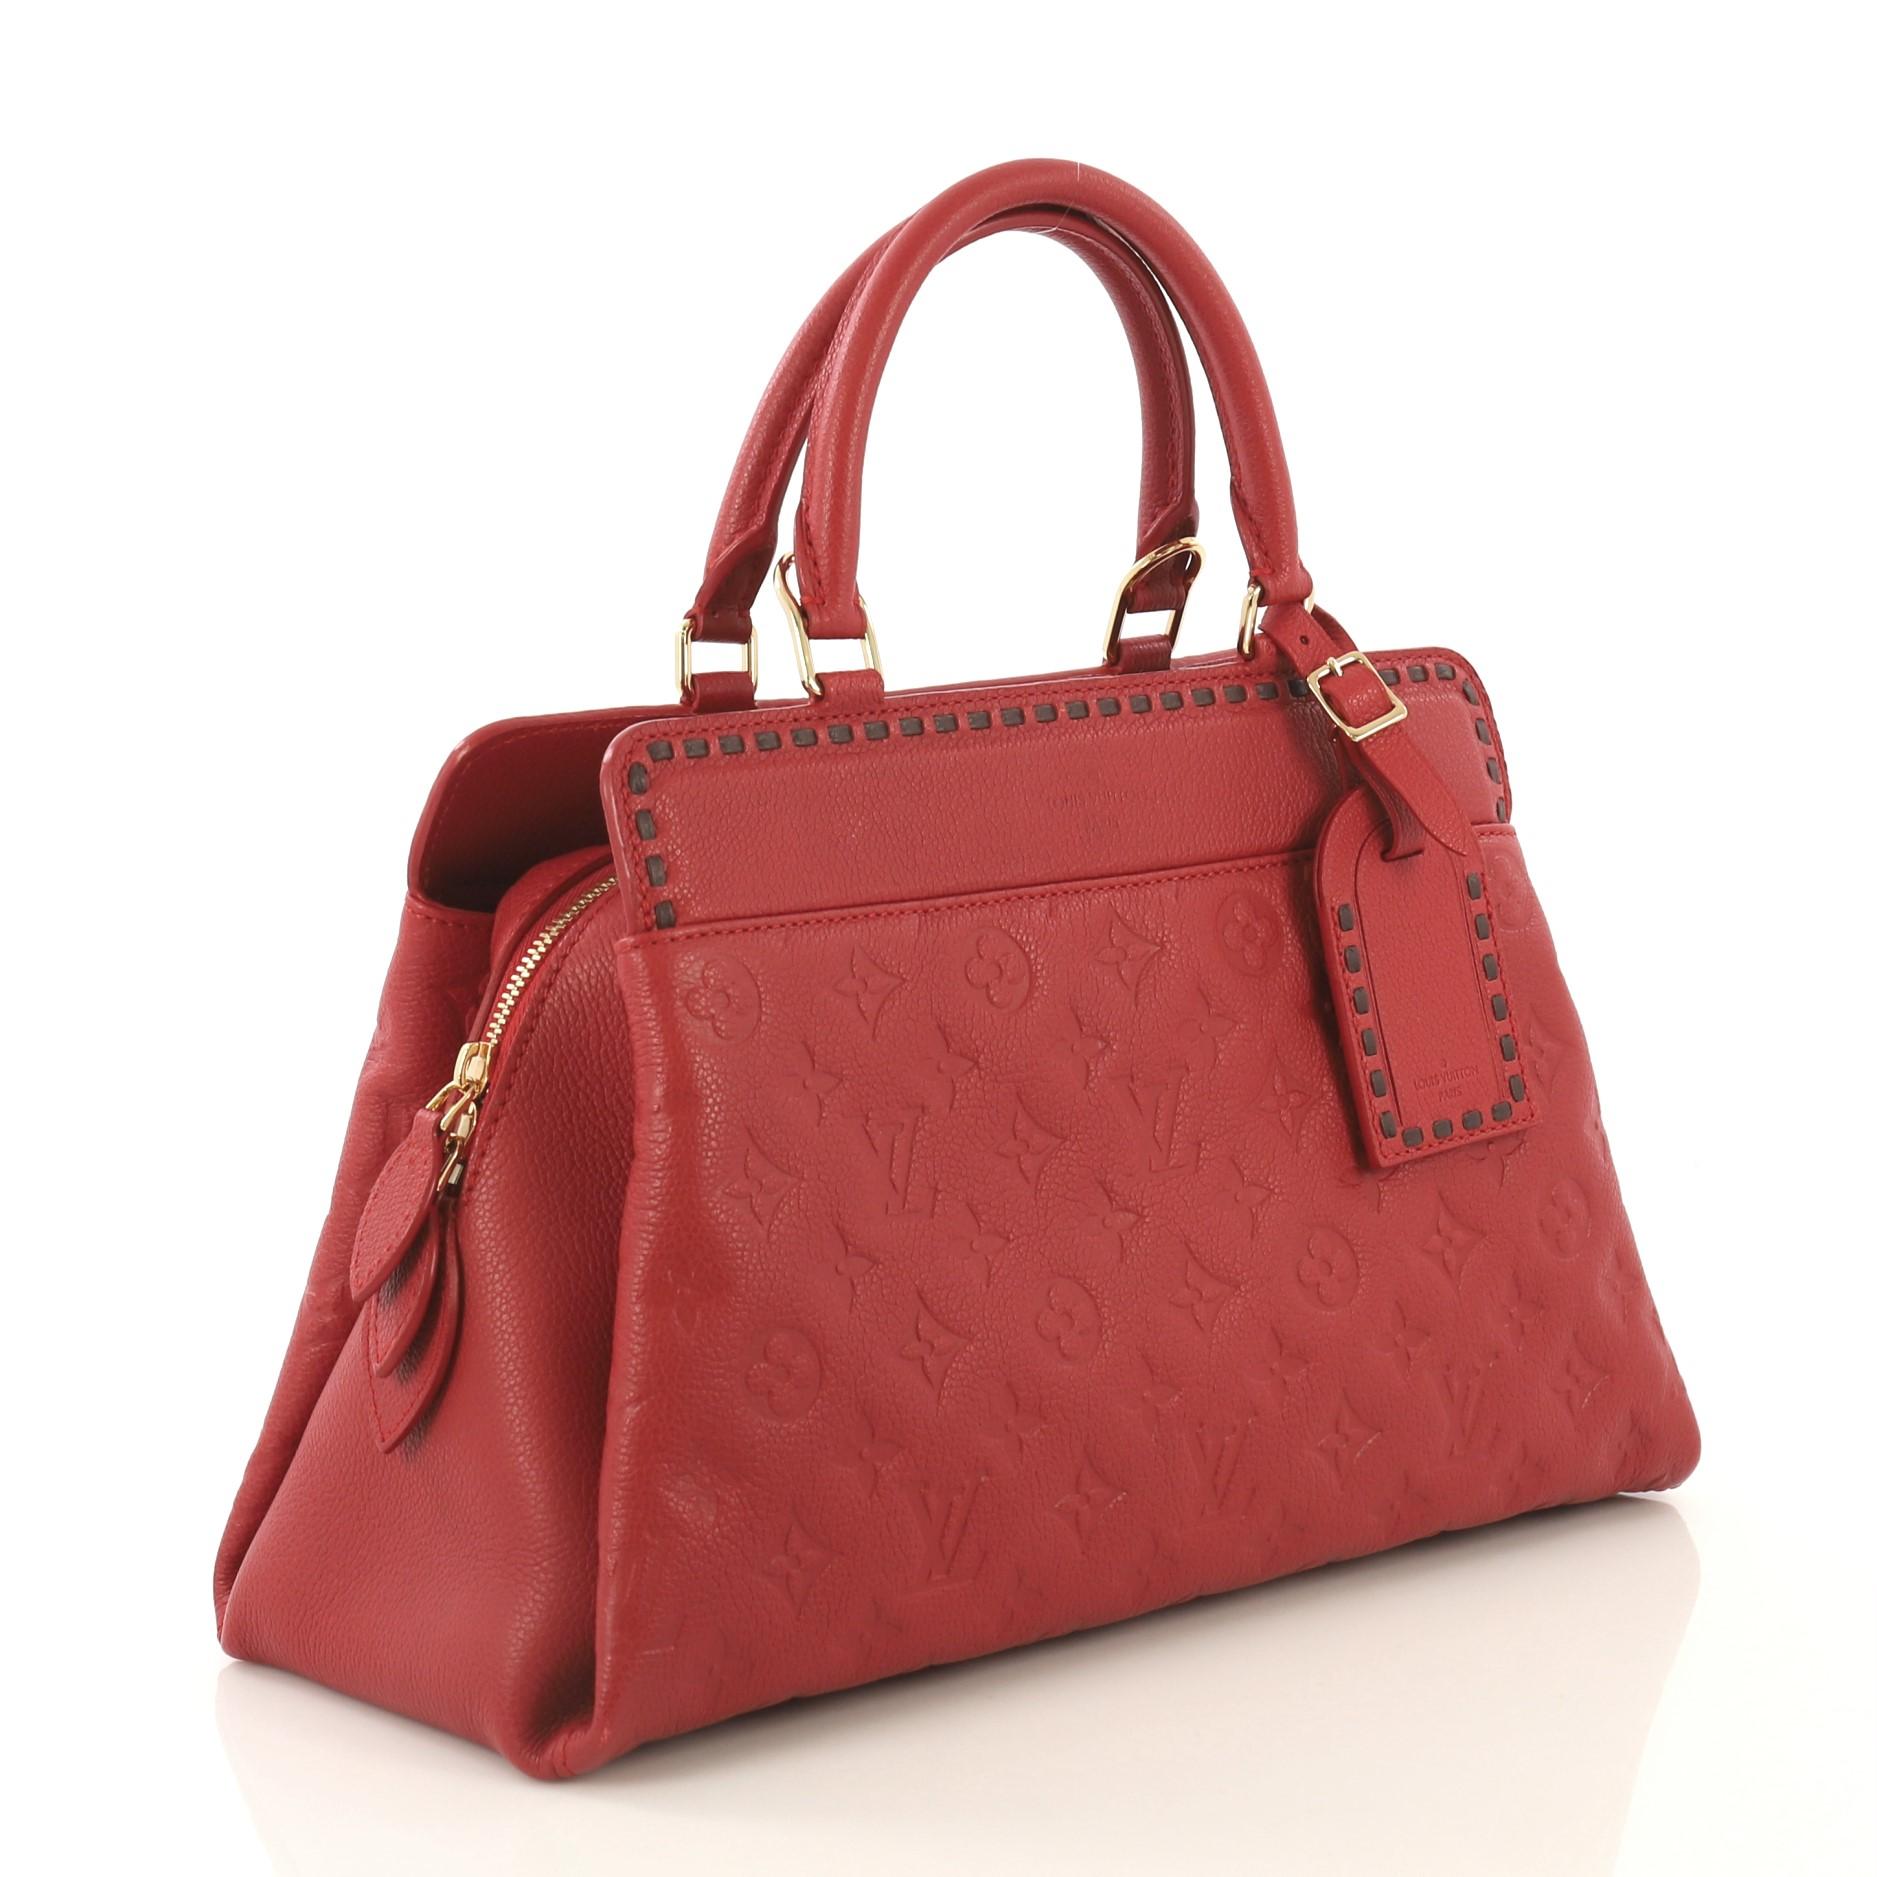 This Louis Vuitton Vosges Handbag Whipstitch Monogram Empreinte Leather MM, crafted from red monogram empreinte leather, features dual rolled leather handles, stitched detailing, and gold-tone hardware. It opens to a red fabric interior divided into